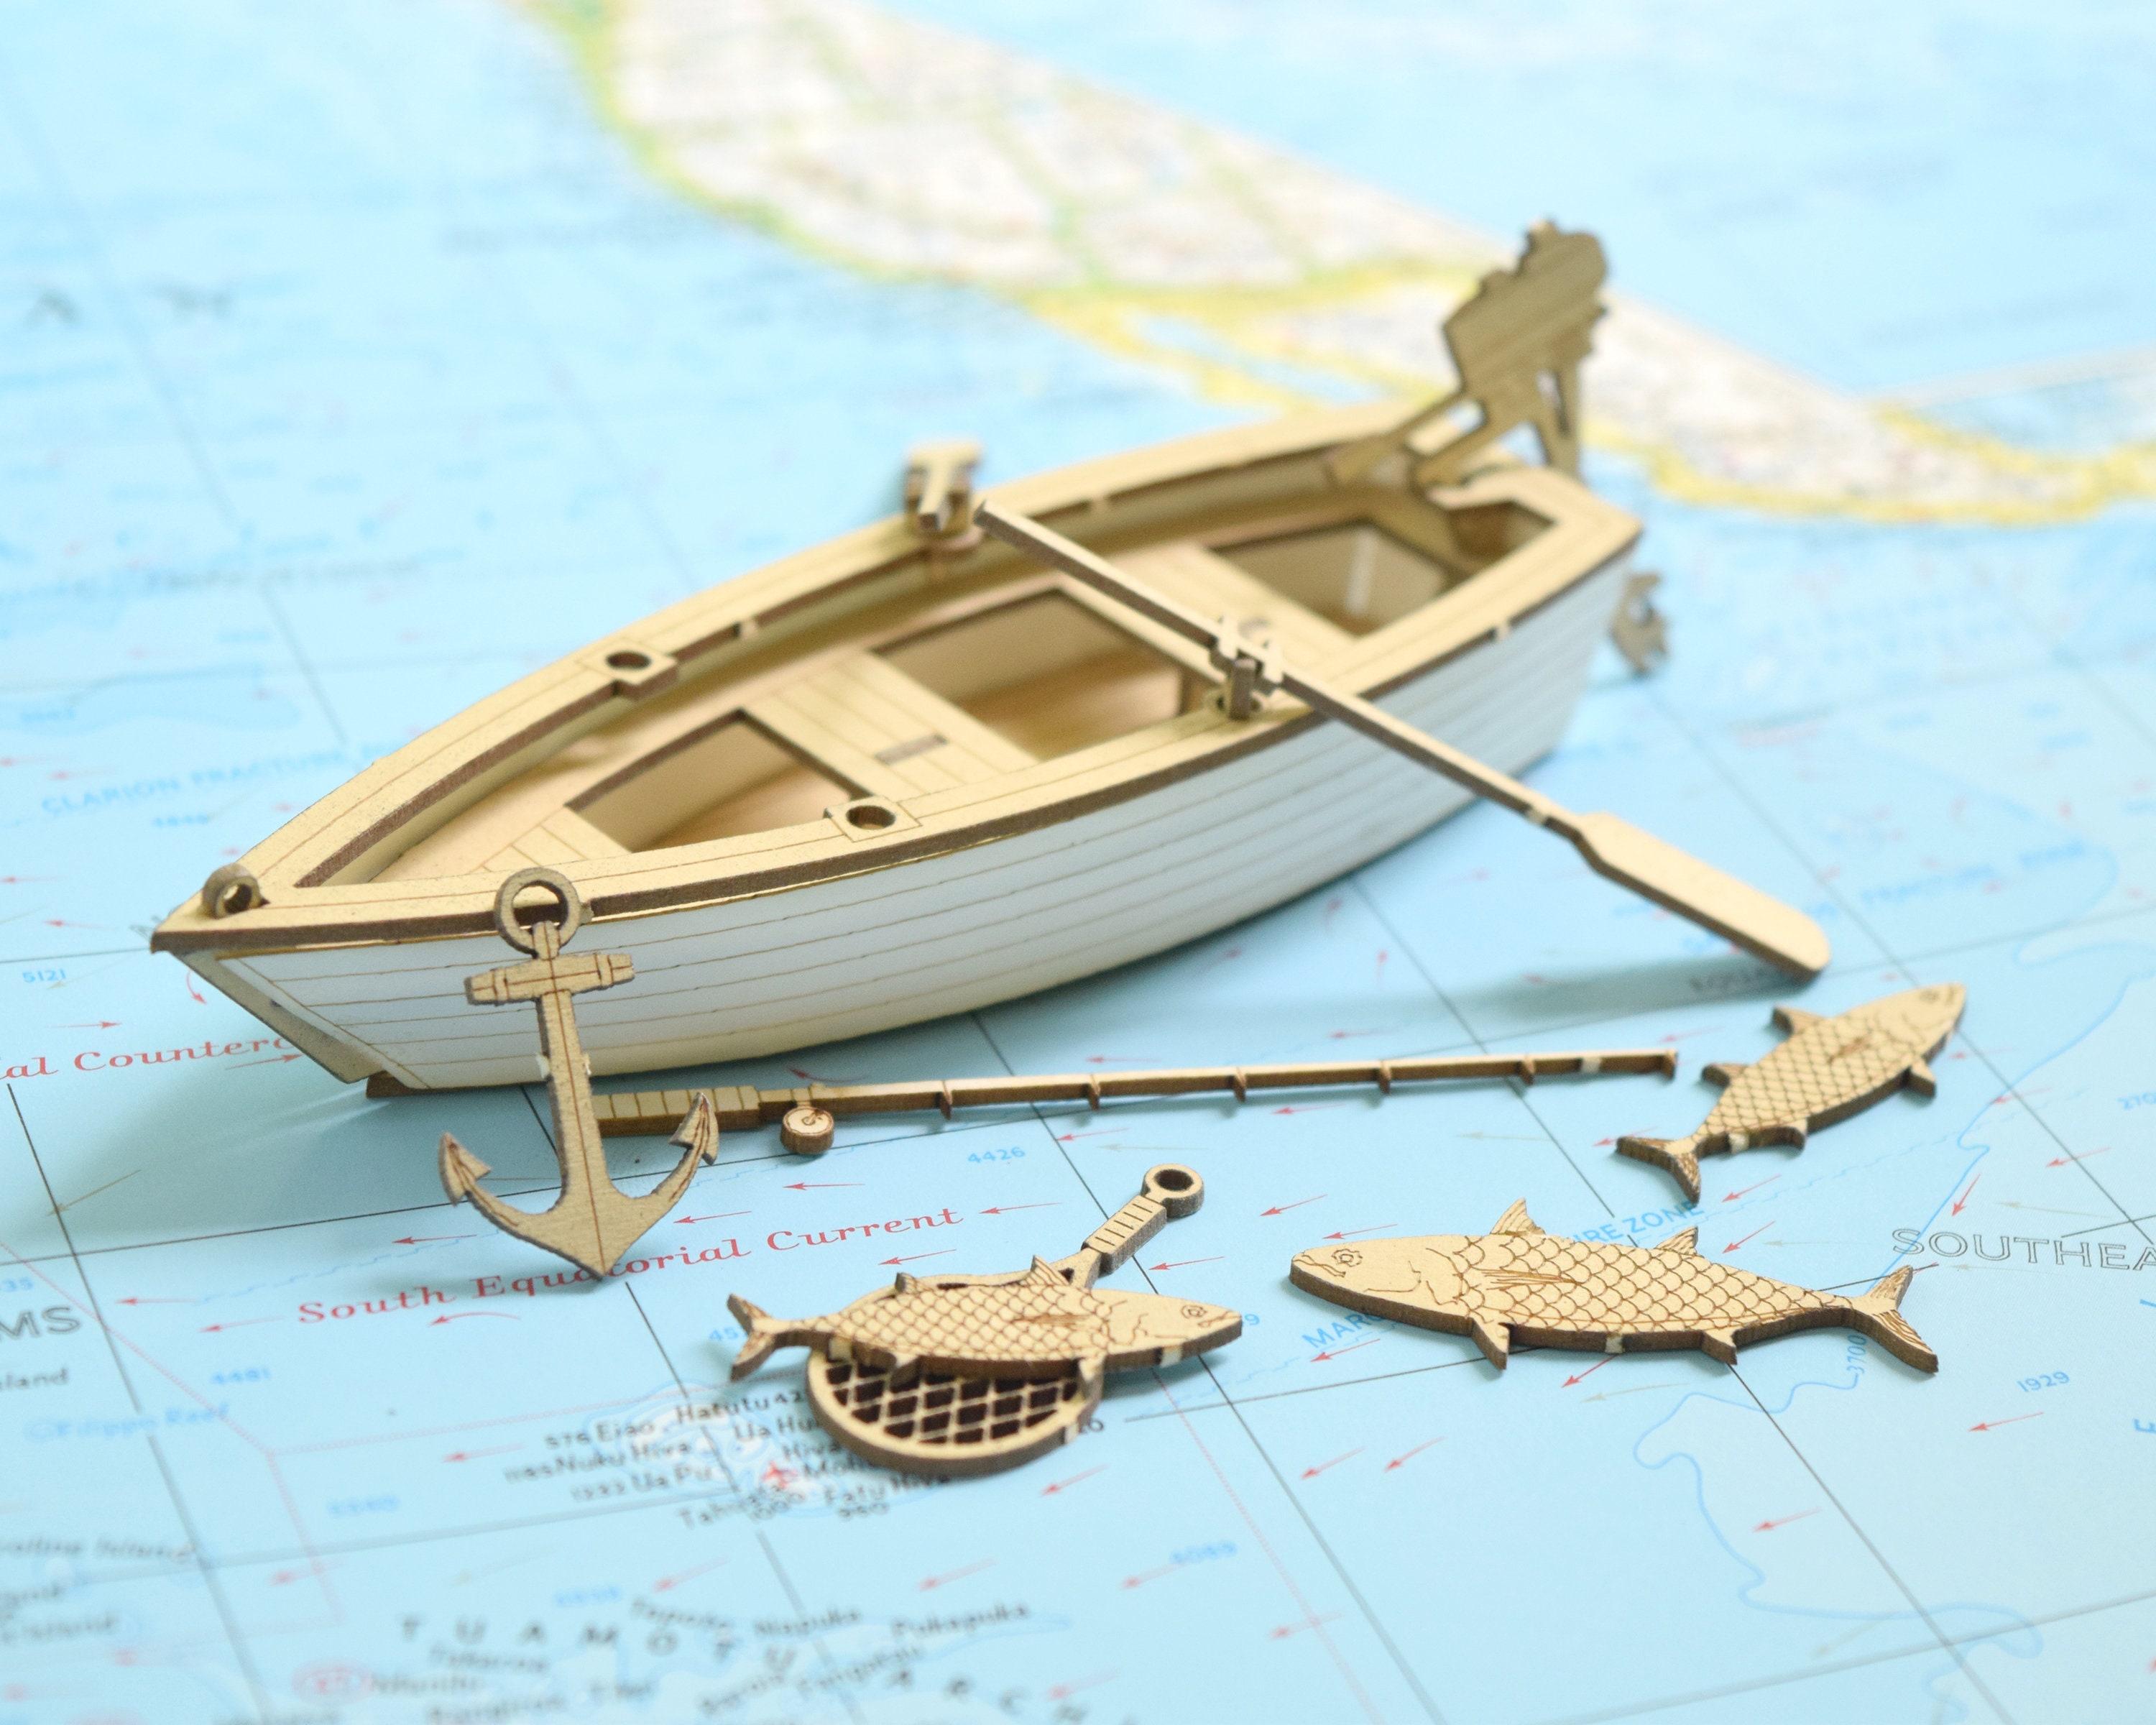 Fishing Boat Model Kit, Laser Cut, Includes Boat, Fish and